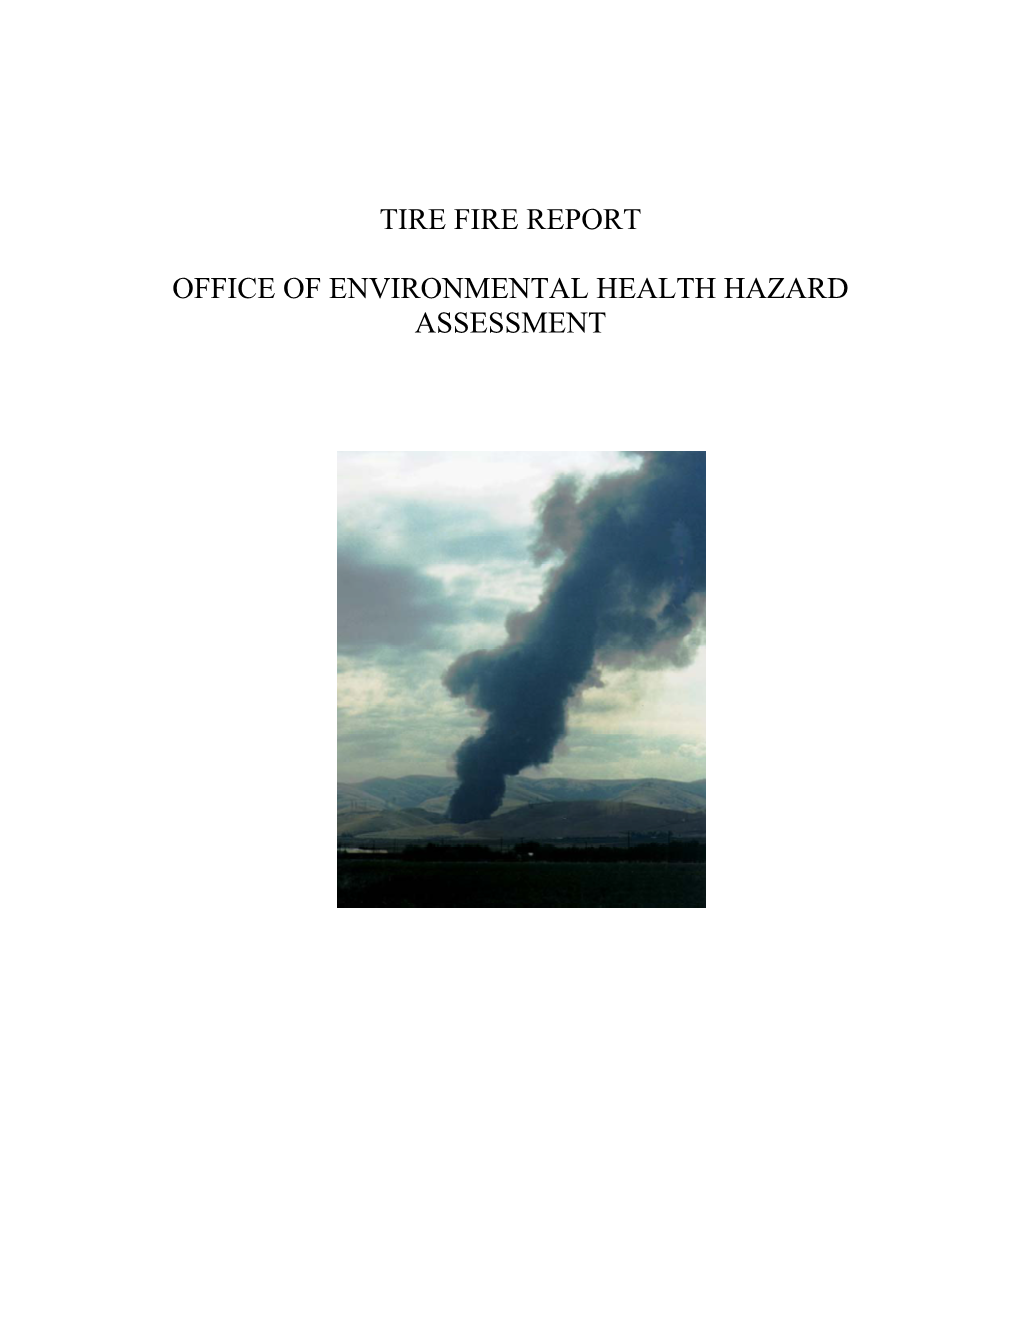 Tire Fire Report Office of Environmental Health